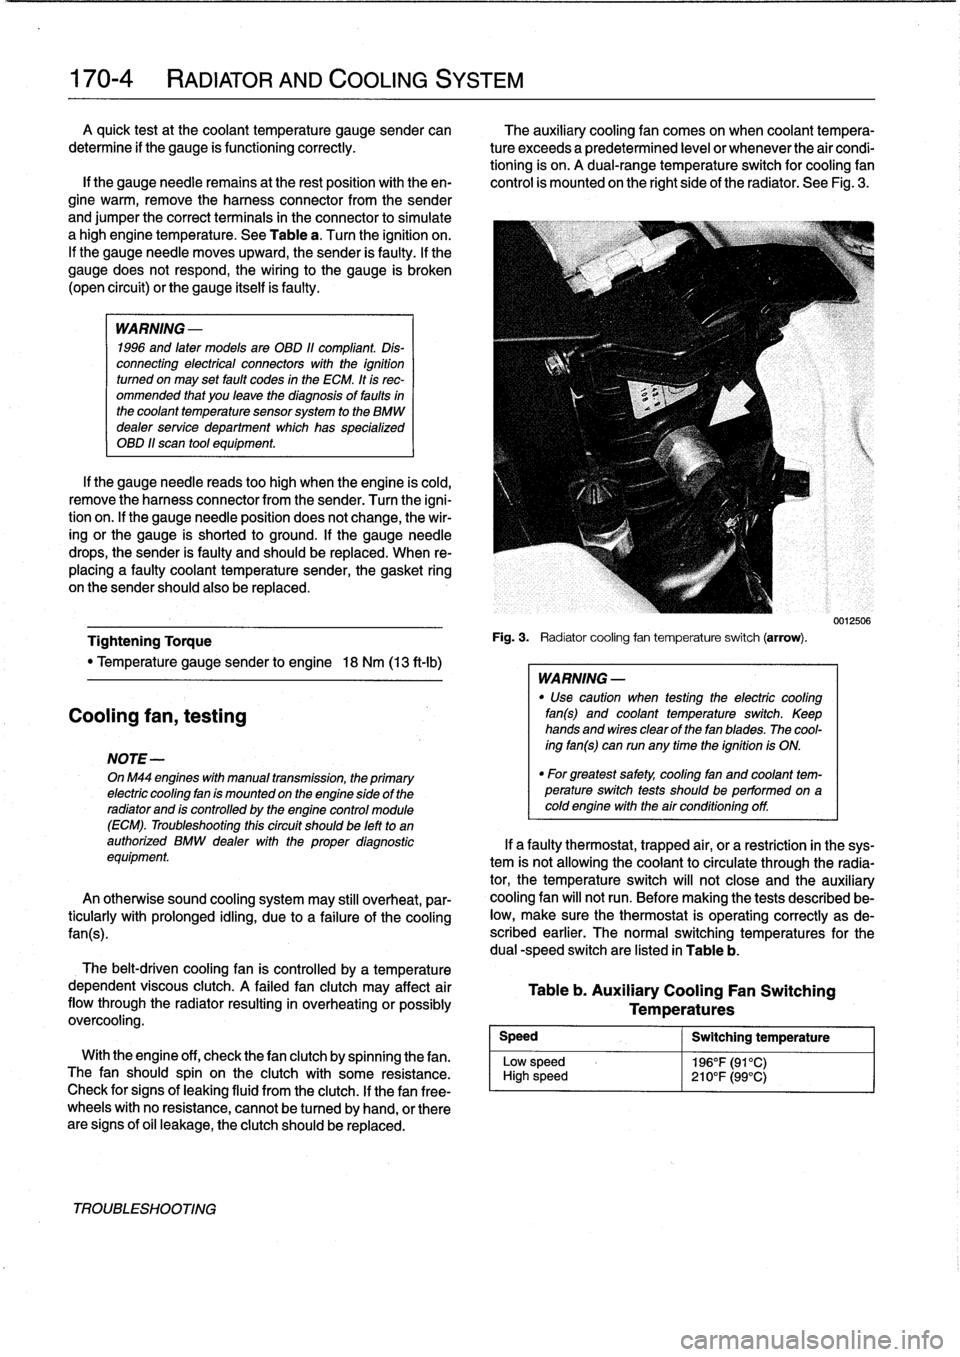 BMW 323i 1997 E36 Owners Guide 
170-
4

	

RADIATOR
AND
COOLING
SYSTEM
A
quick
testat
the
coolant
temperature
gauge
sender
can

	

The
auxiliary
cooling
fan
comes
on
when
coolant
tempera

determine
if
the
gauge
is
functioning
corre